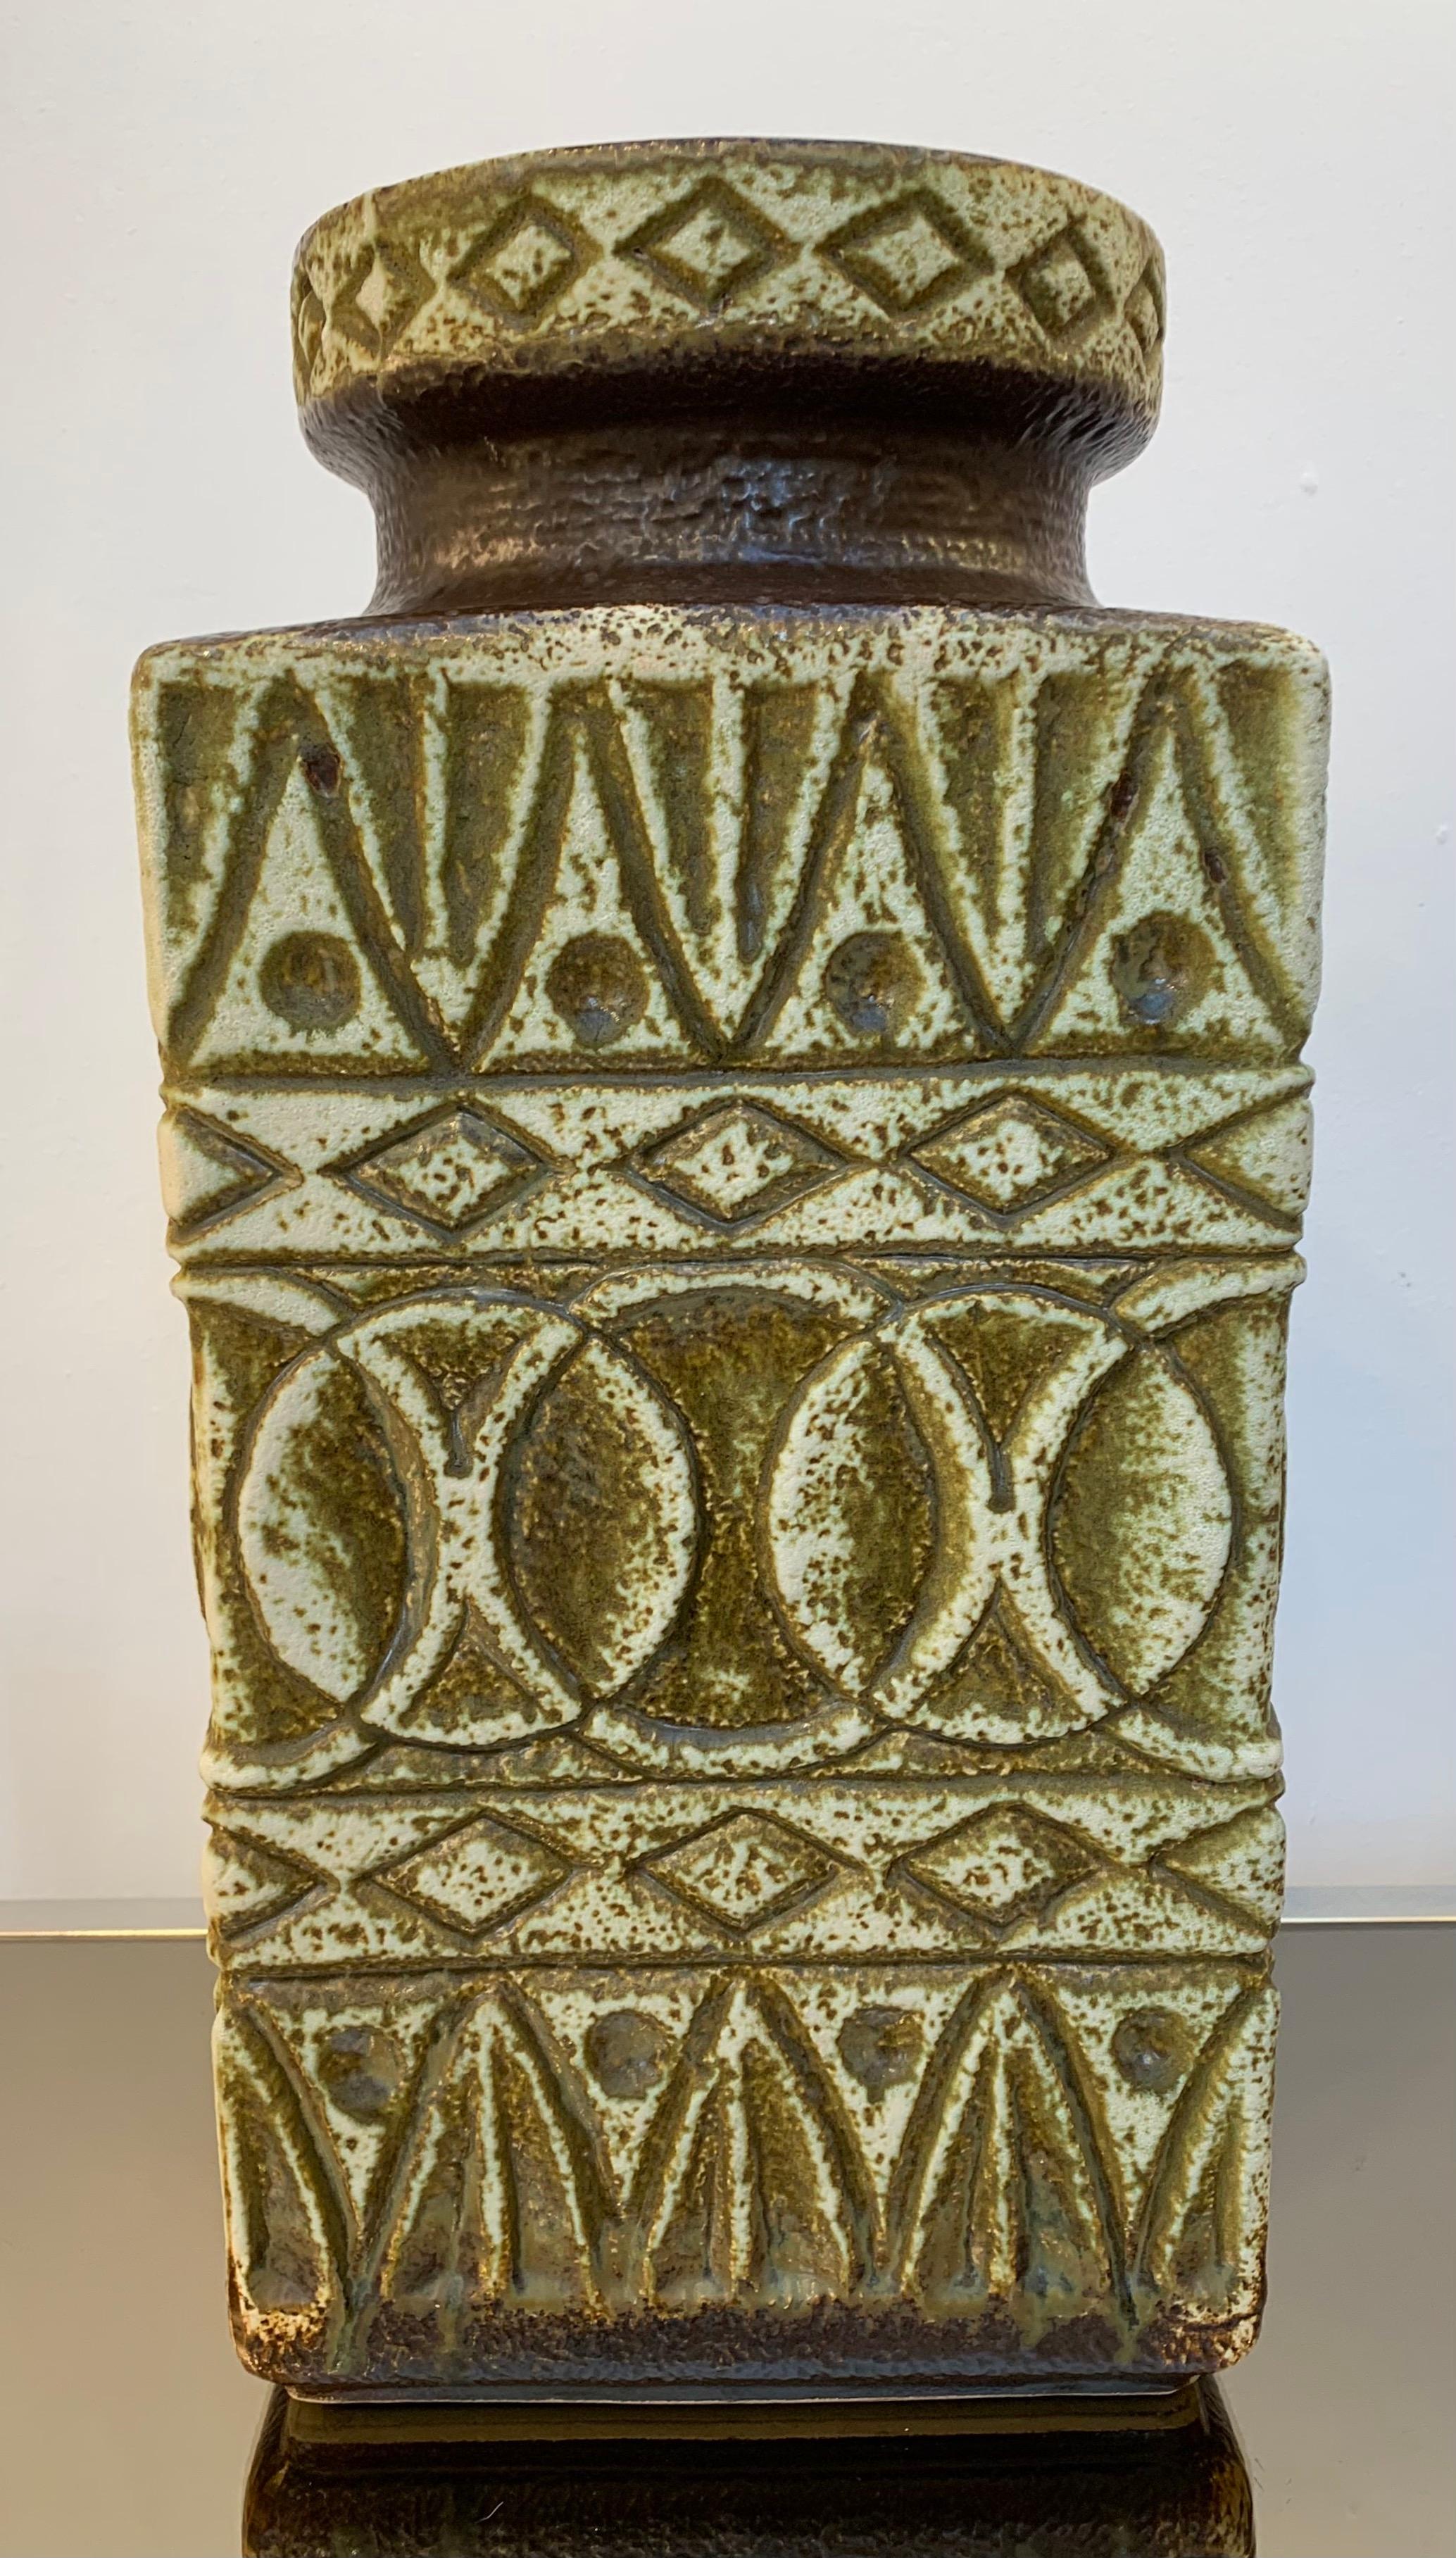 1970s German Fat Lava Bay Ceramics Pottery Abstract Vase by Bodo Mans 92 45 In Good Condition For Sale In London, GB